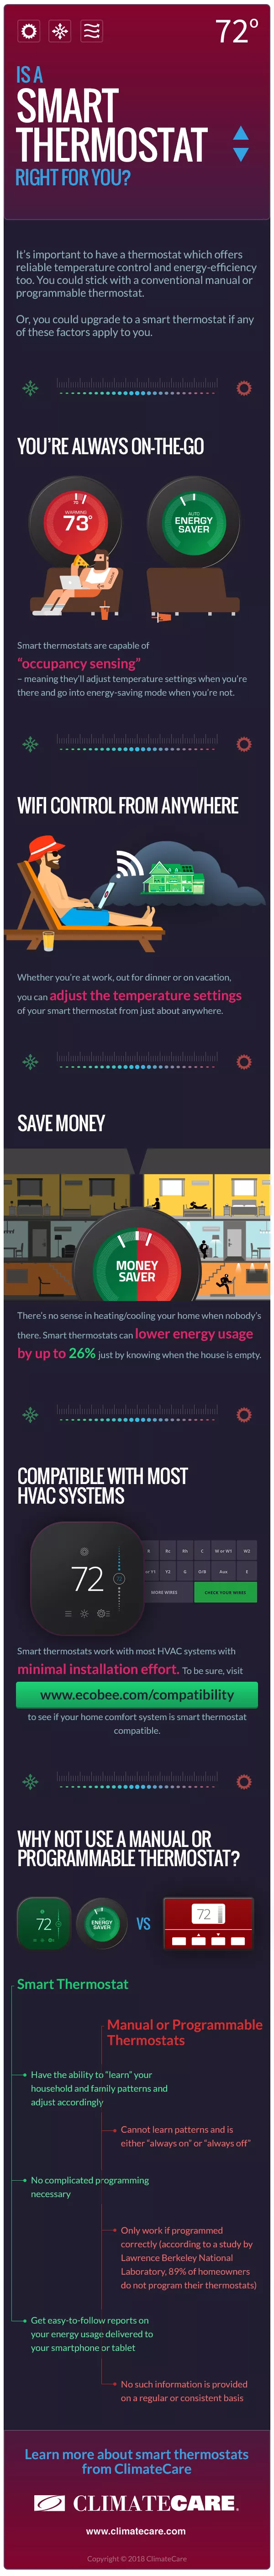 Smart thermostat infographic